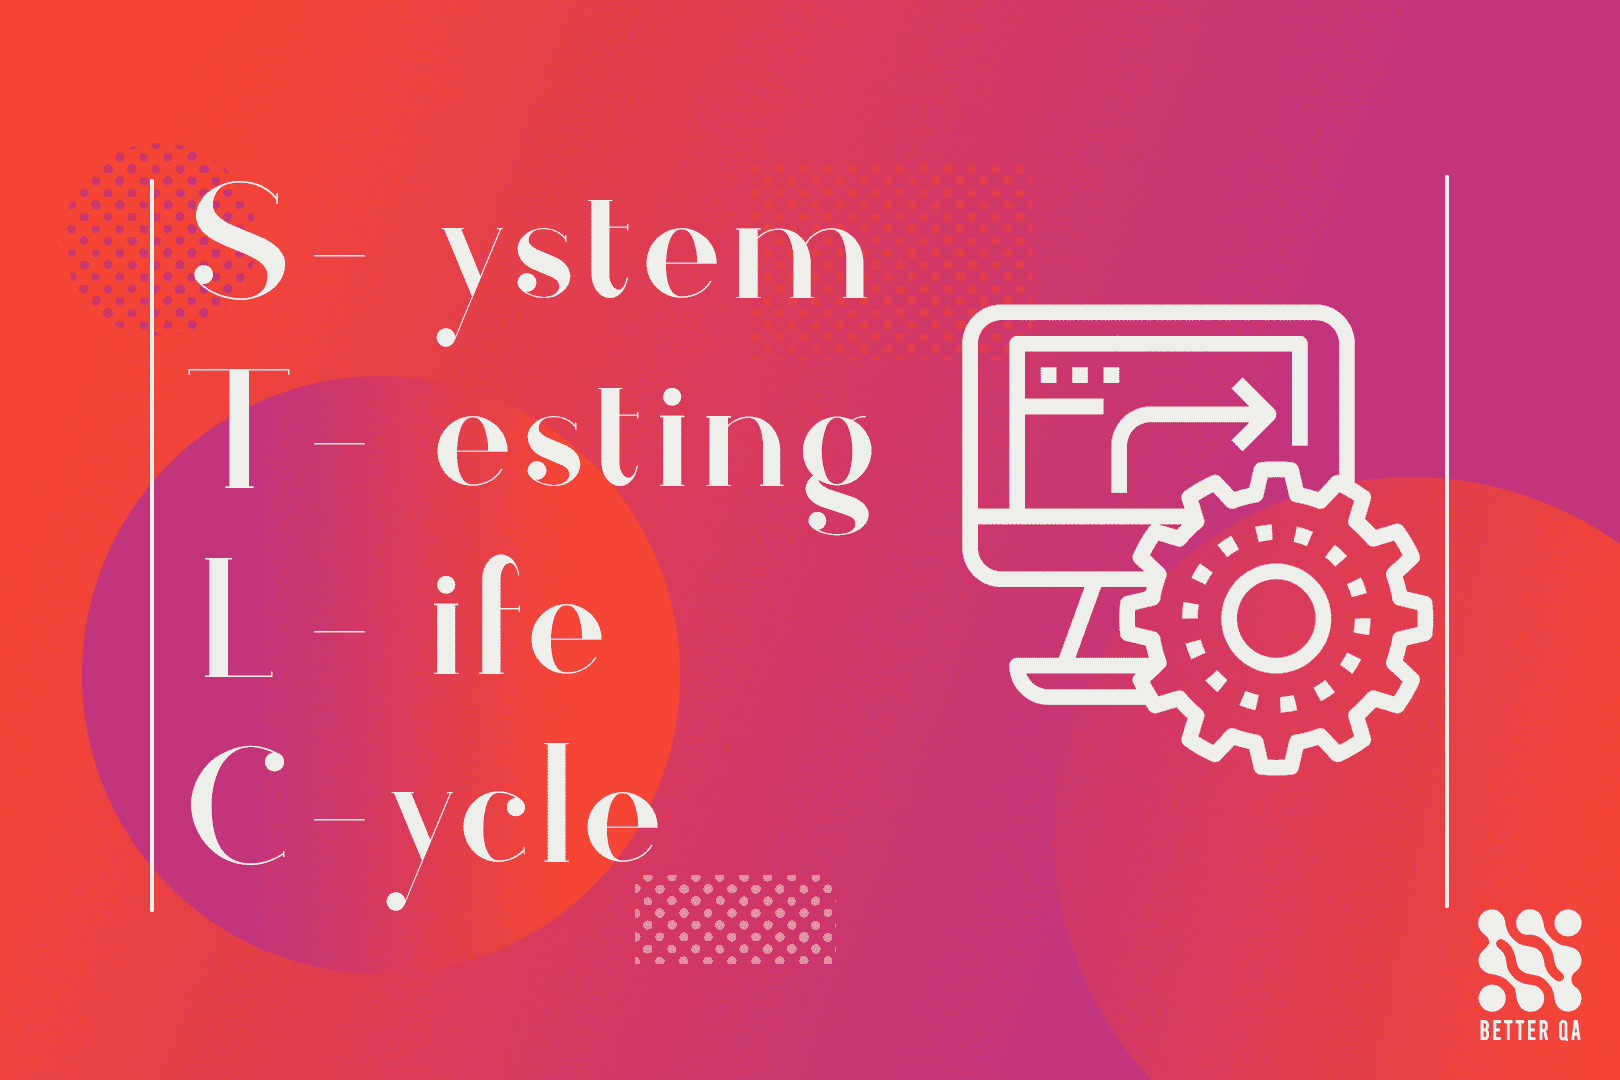 stlc - software testing life cycle